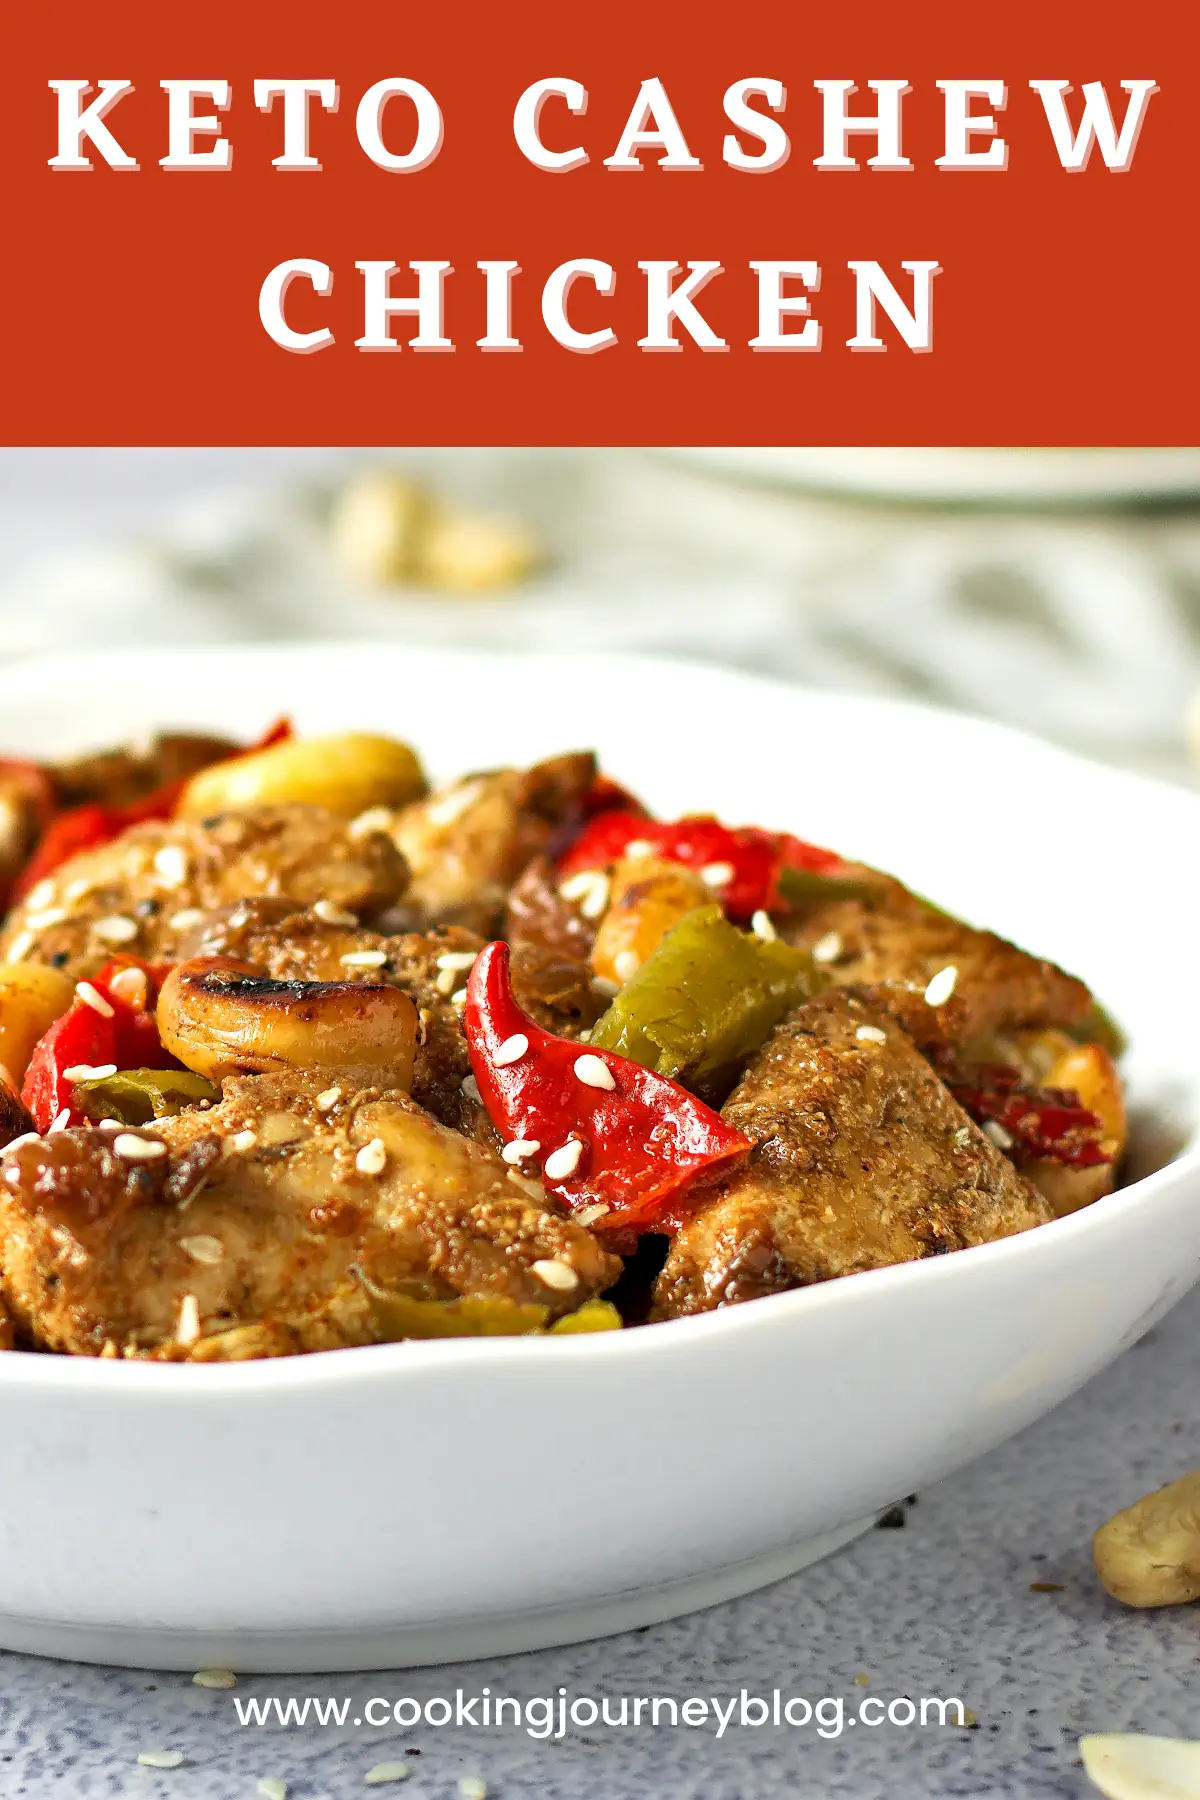 Keto Cashew Chicken in a white bowl, served for dinner. Great gluten-free chicken recipe. Easy, quick and flavorful meal.